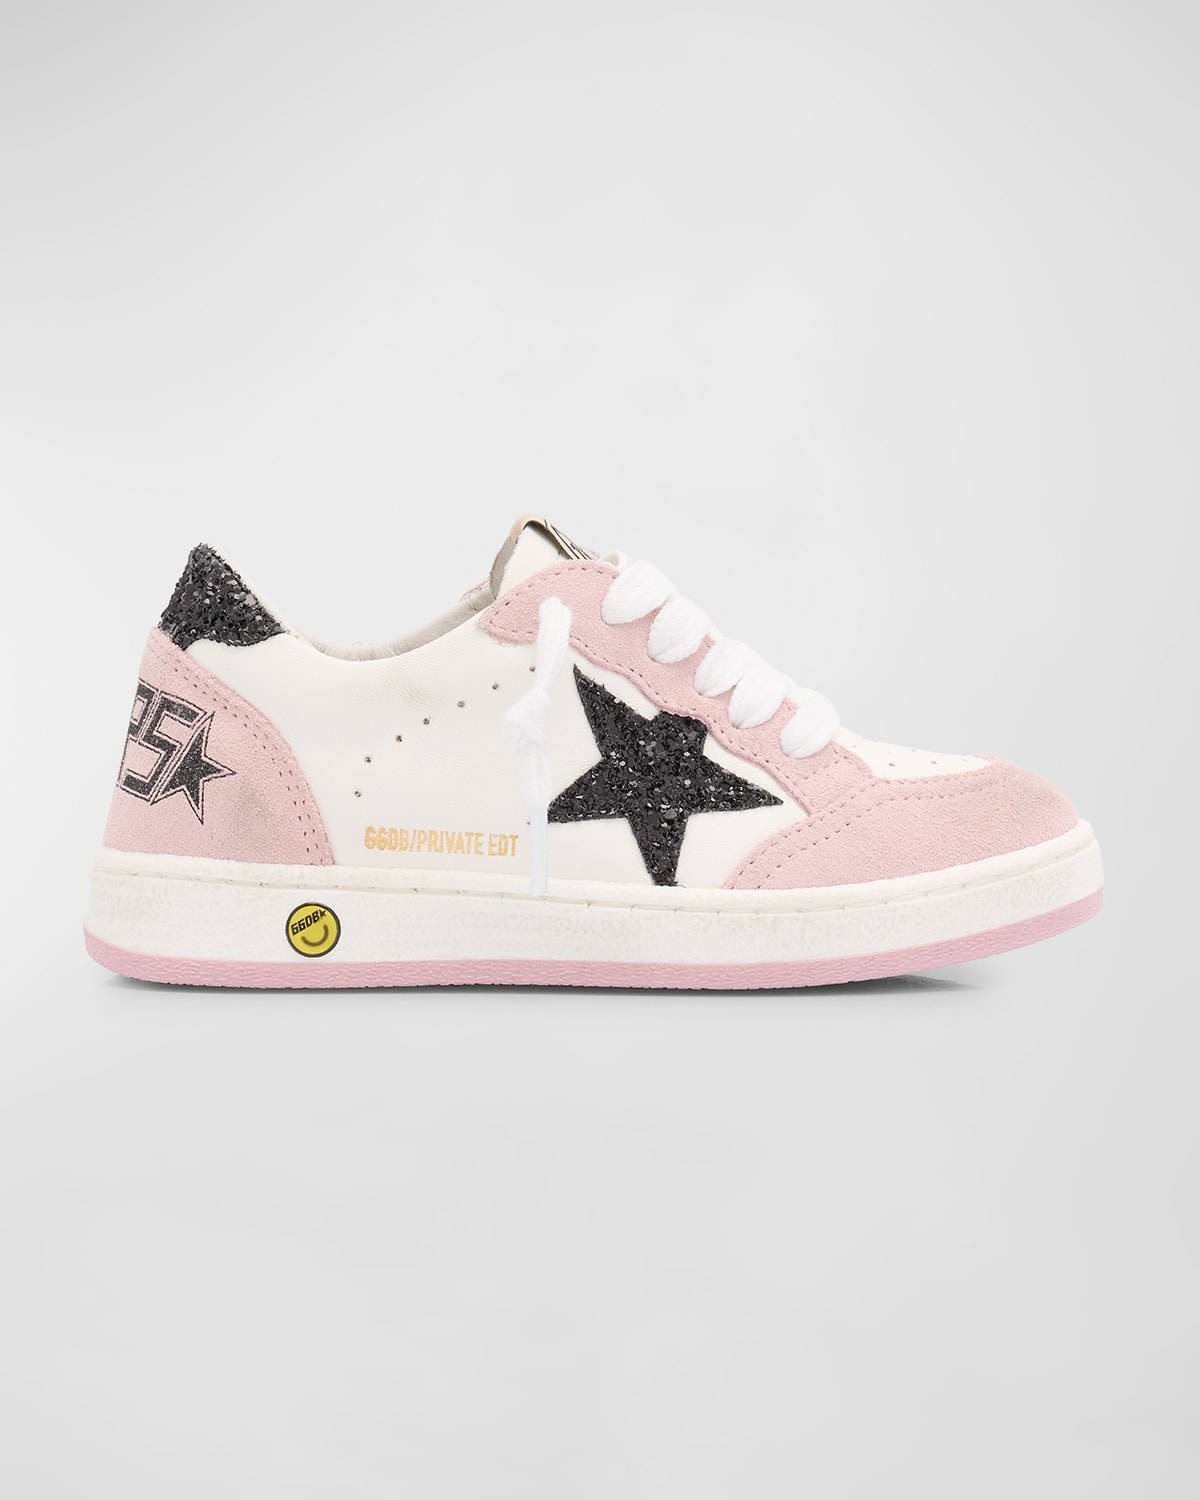 Shop Golden Goose Girl's Ballstar Leather Glitter Sneakers, Baby/toddlers In White/pink/black